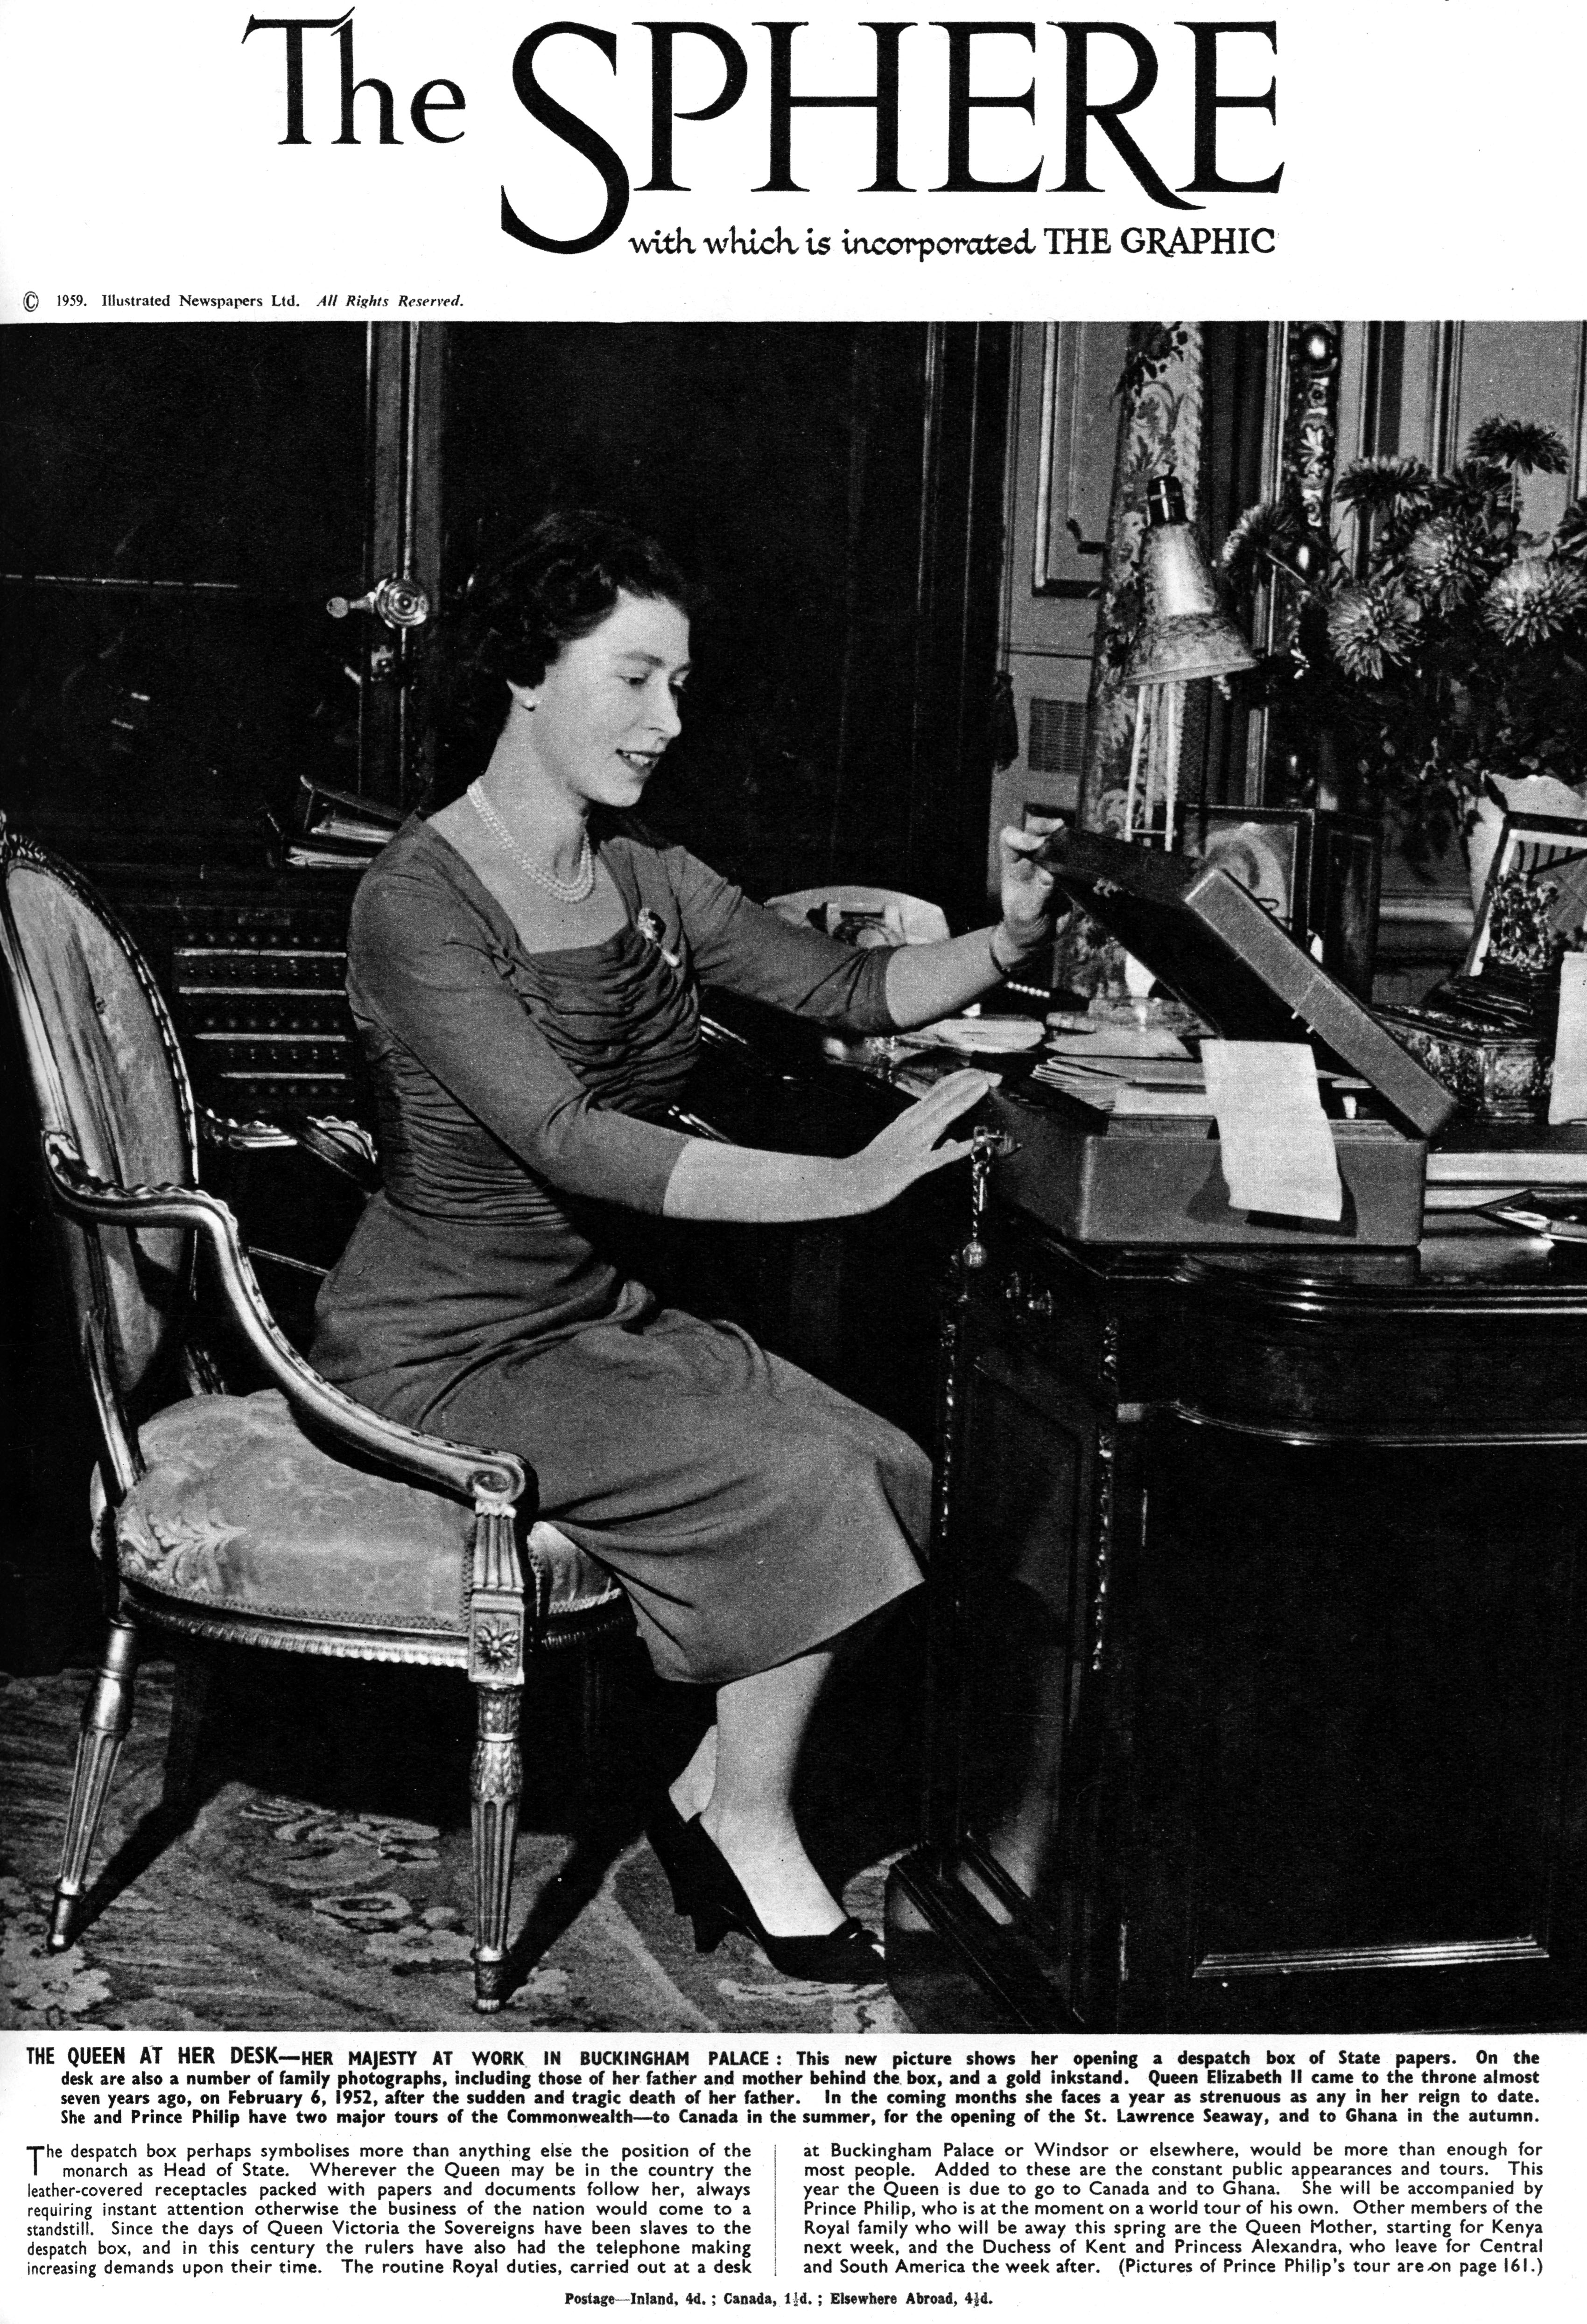 First Anniversary The Queen’s Death - The Queen at work from Buckingham Palace in 1959